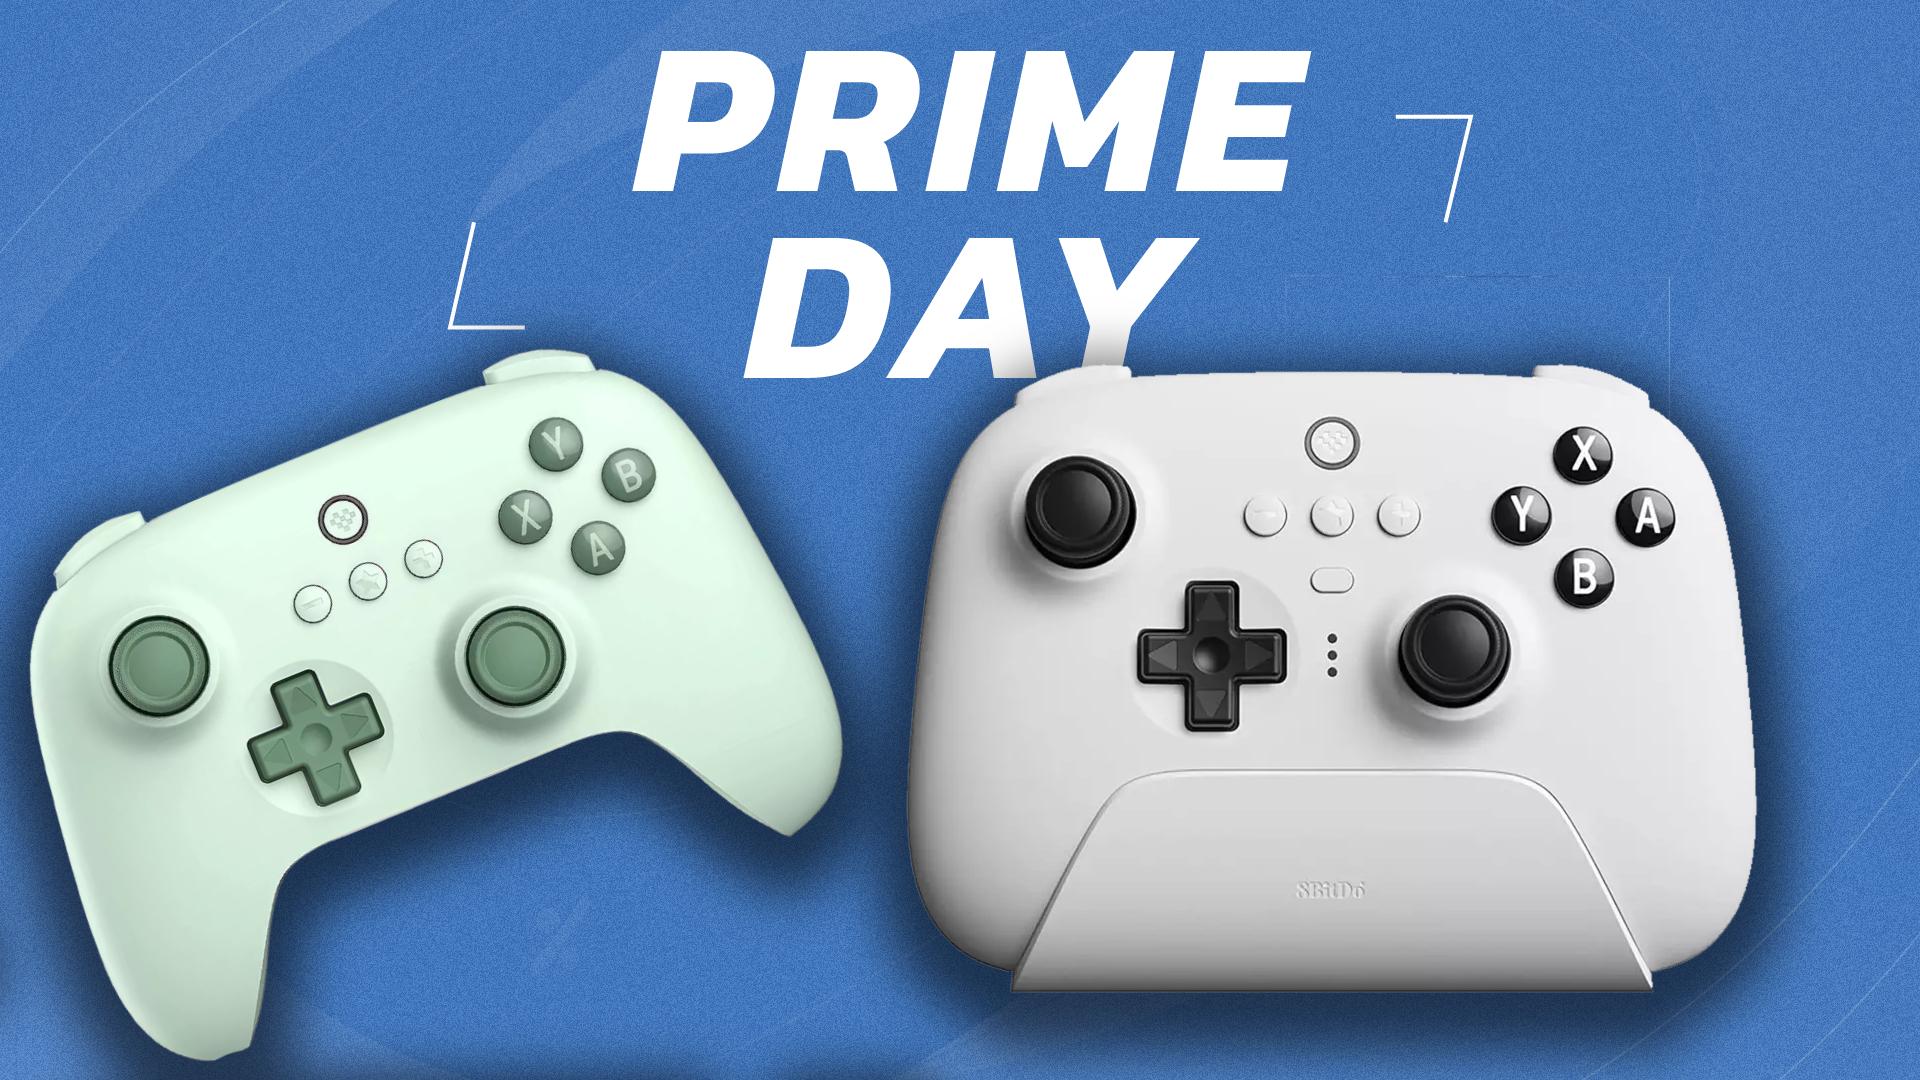 8itDo controllers on blue background with "Prime Day" lettering